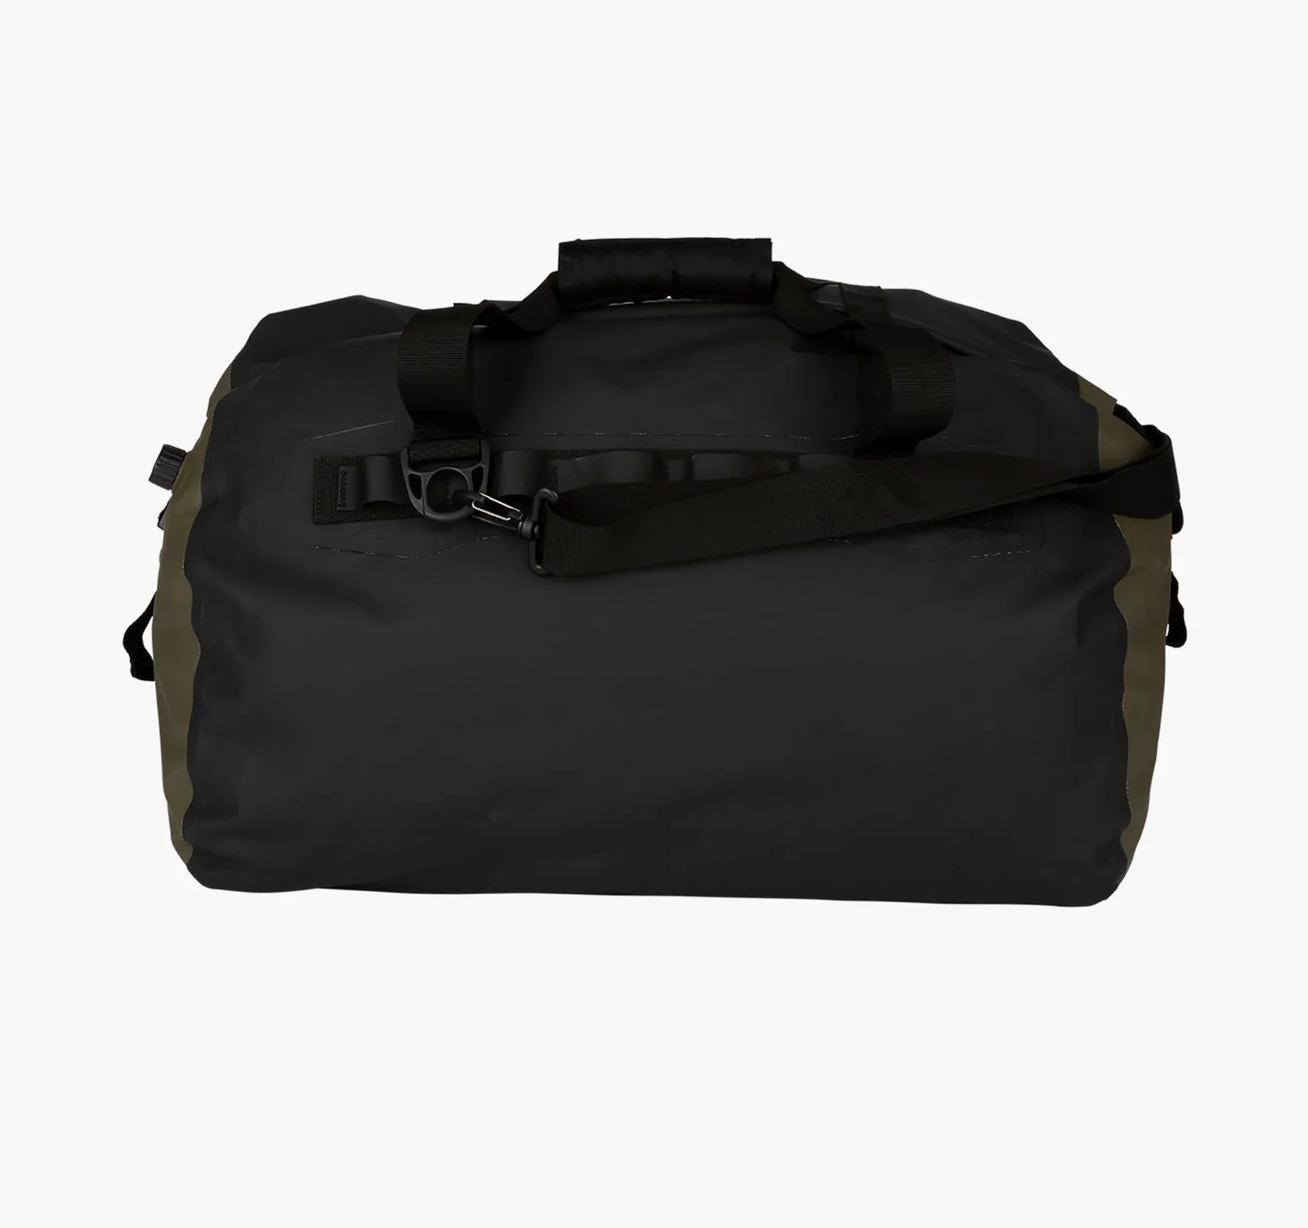 SALTY CREW   VOYAGER BLACK/MILITARY DUFFLE